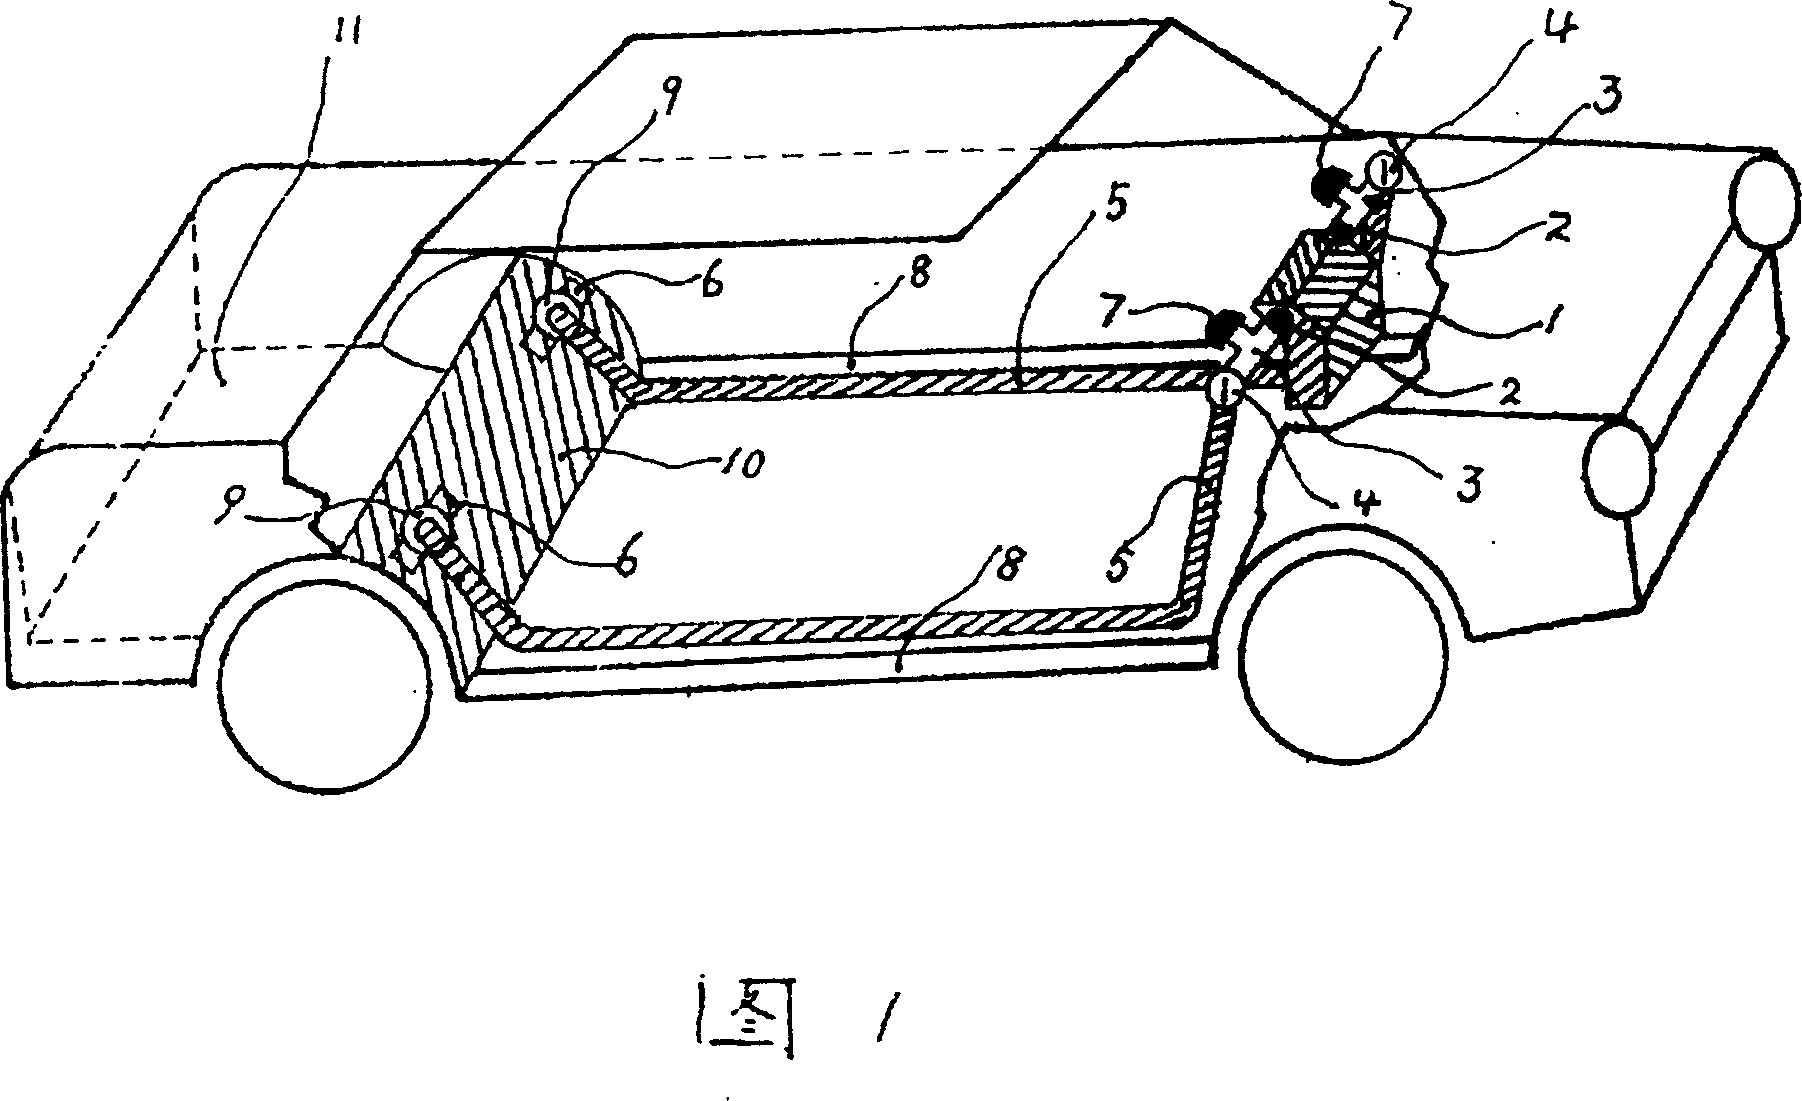 Car air-condictioning refrigeration system and the baggage compartment